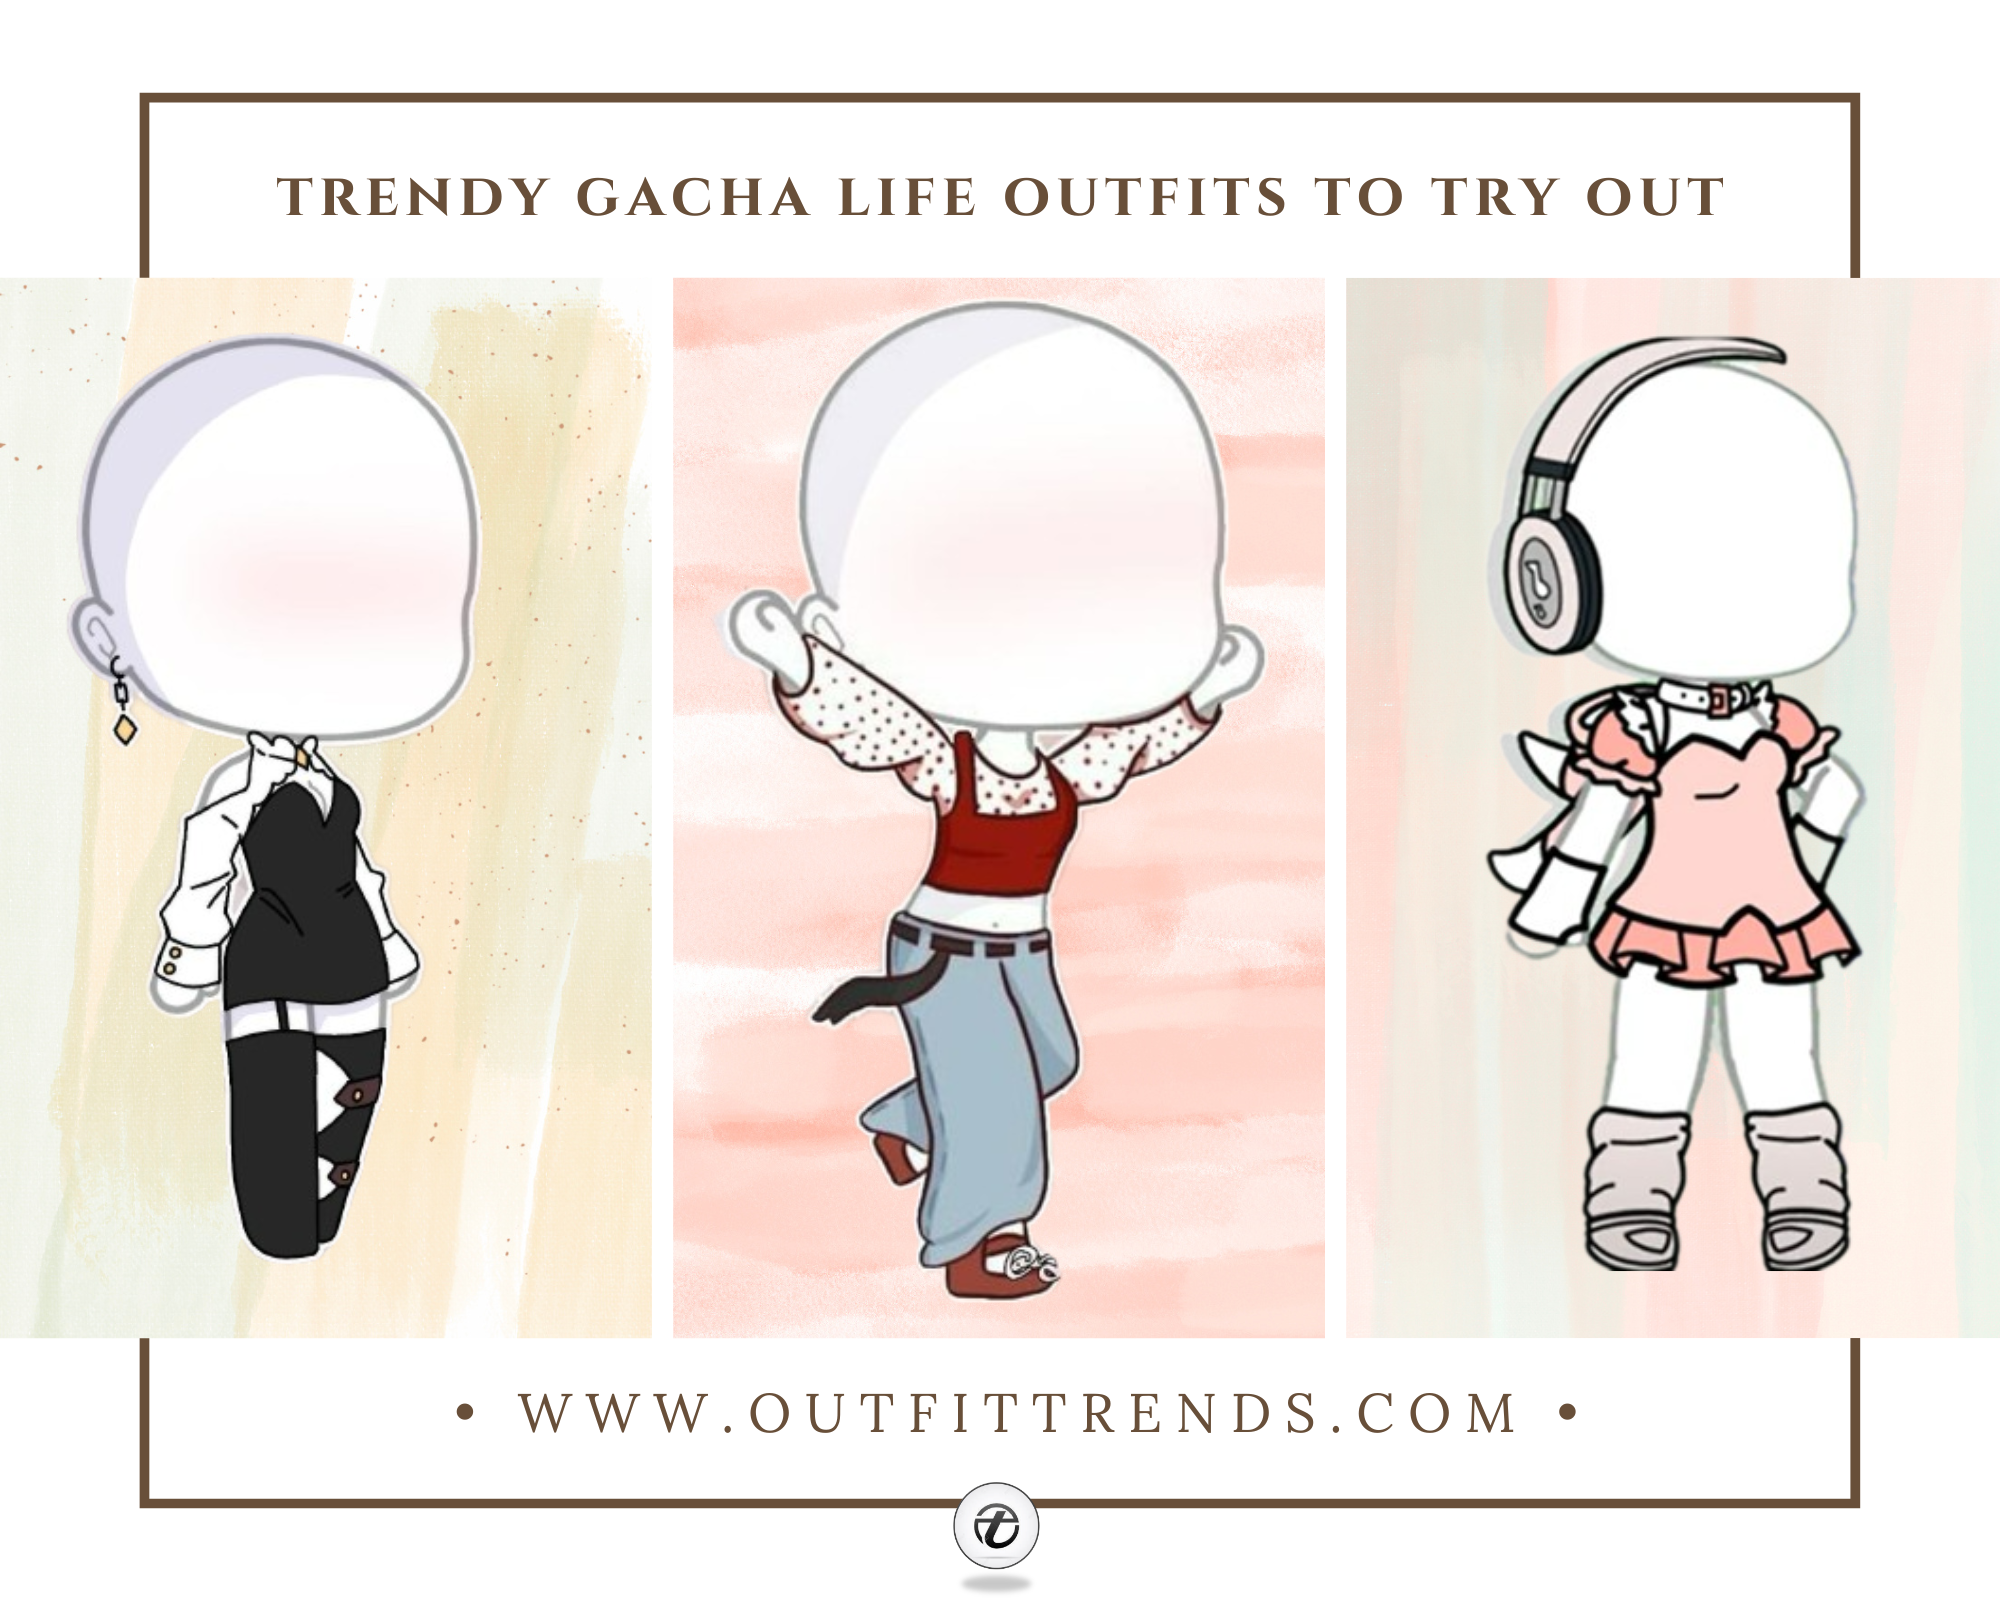 59 Gacha Life Outfits ideas  outfits, drawing clothes, oufit ideas